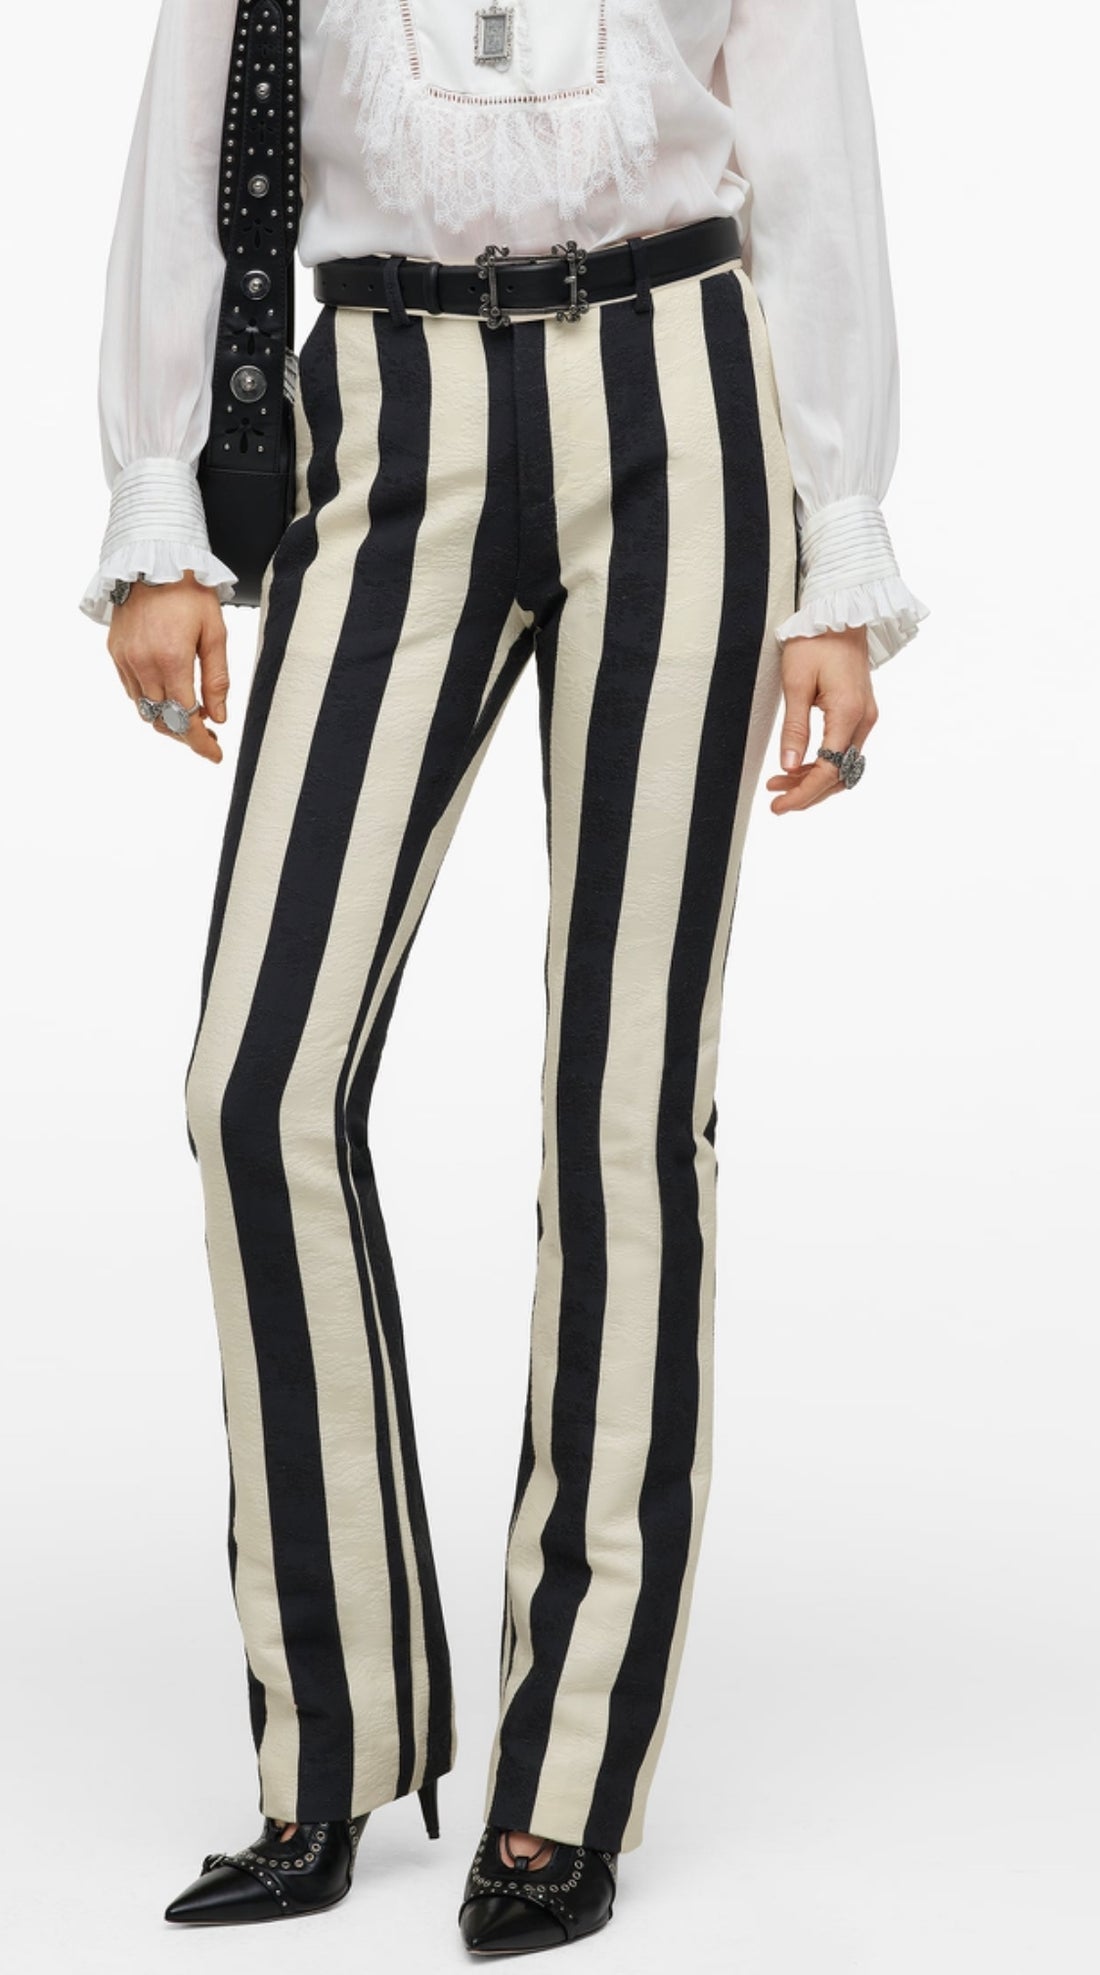 Stripes - Vertical or Horizontal?? Case in point these striped